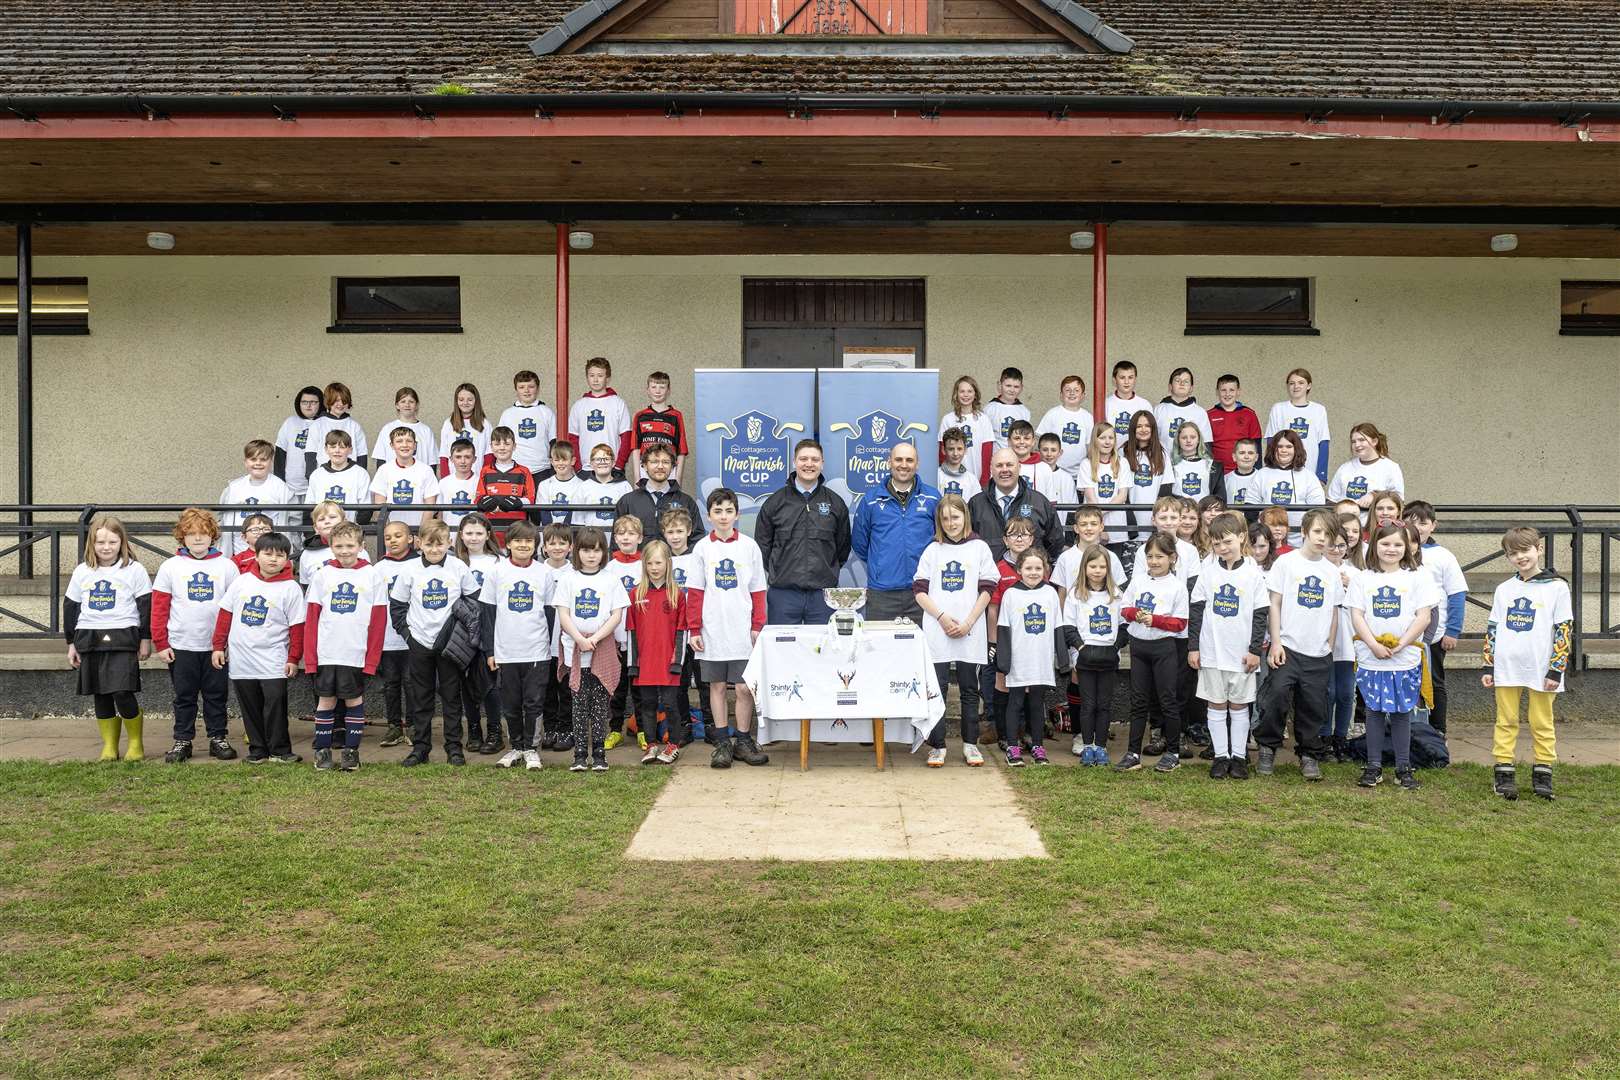 Glenurquhart Primary School conducted the MacTavish Cup semi final draw, which took place at Blairbeg Park, Drumnadrochit.